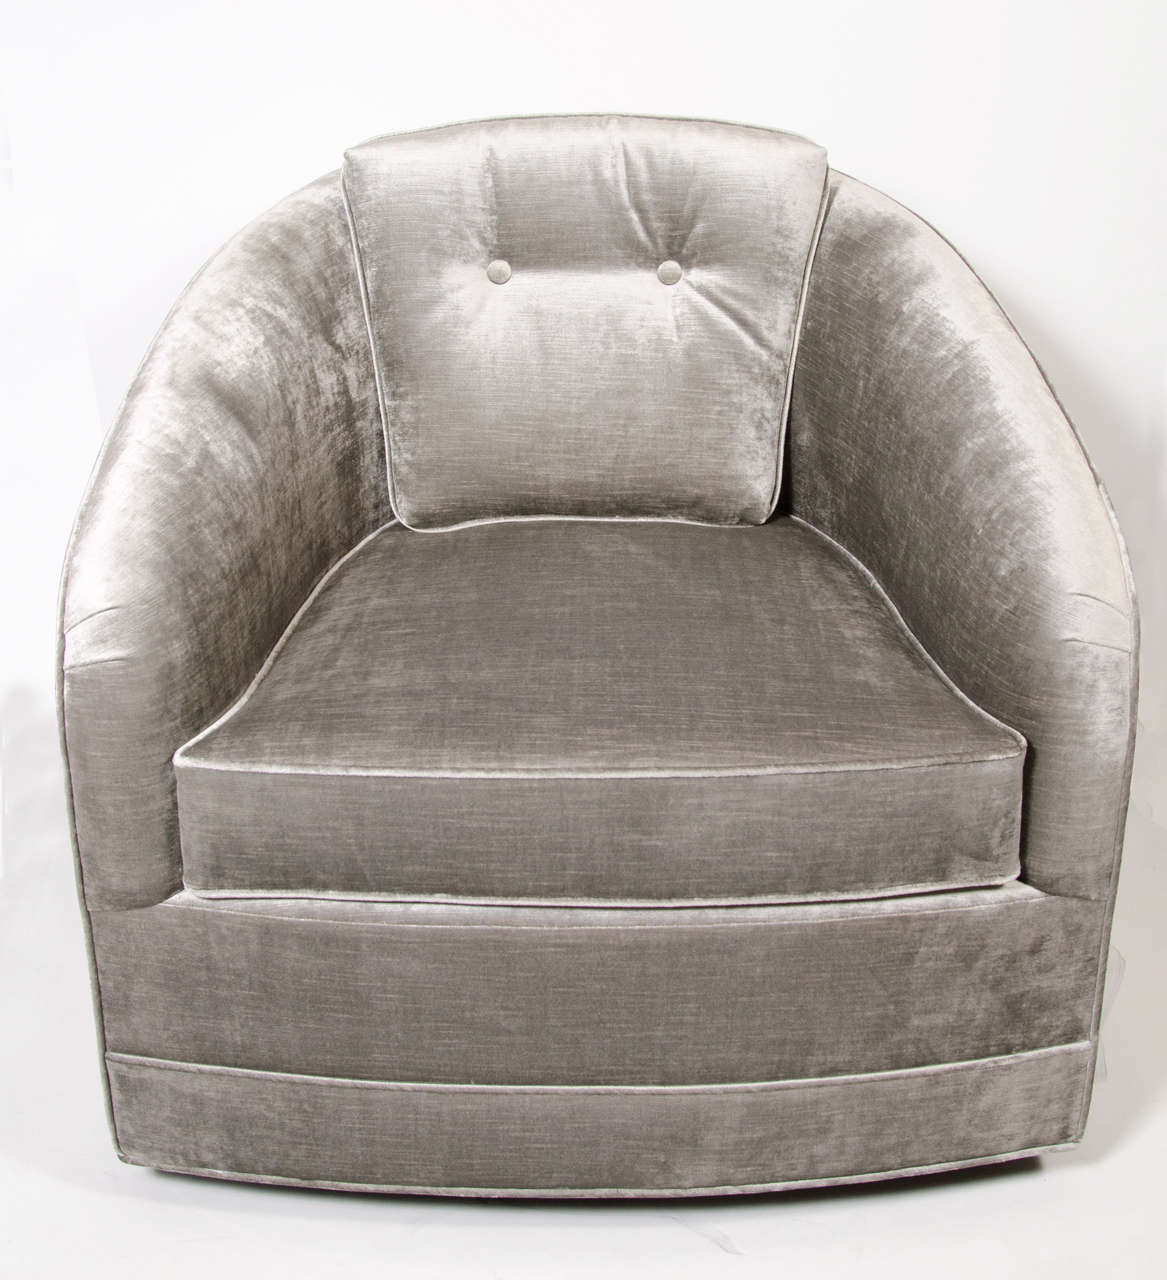 This stunning and elegant Mid-Century Modern swivel chair was realized, circa 1970. It features button back detailing, removable seat cushions and piping embellishments throughout. With its elegant proportions, clean modernist lines and neutral